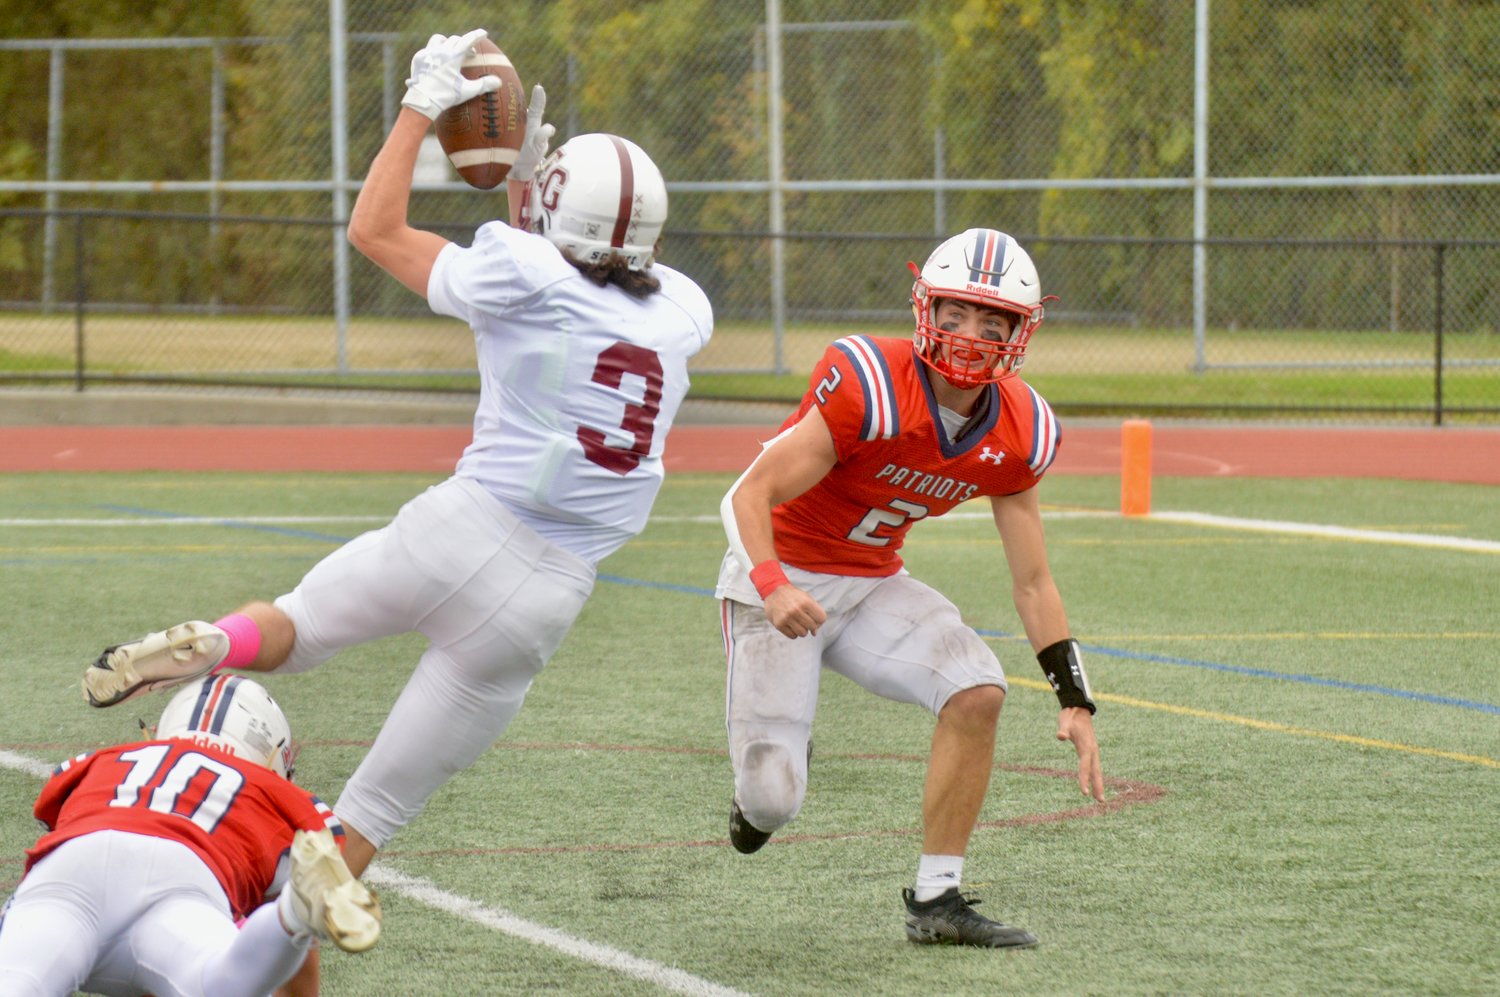 The Avengers’ Evan Macaulay scores the first touchdown of the game despite receiving a hard hit from Ben Hurd (right).